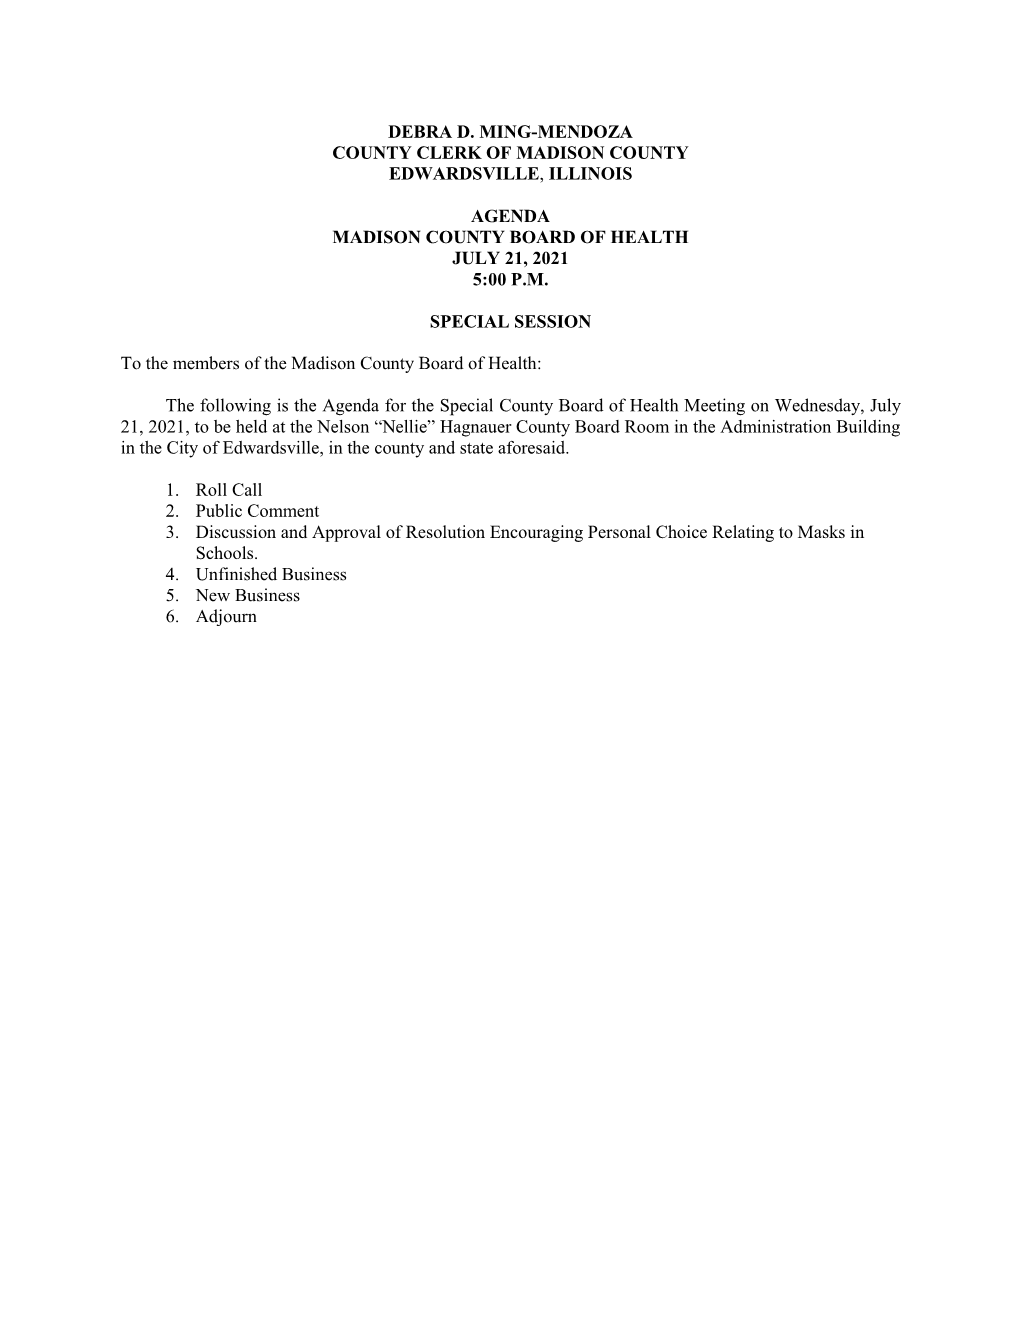 Madison County Board of Health July 21, 2021 5:00 P.M